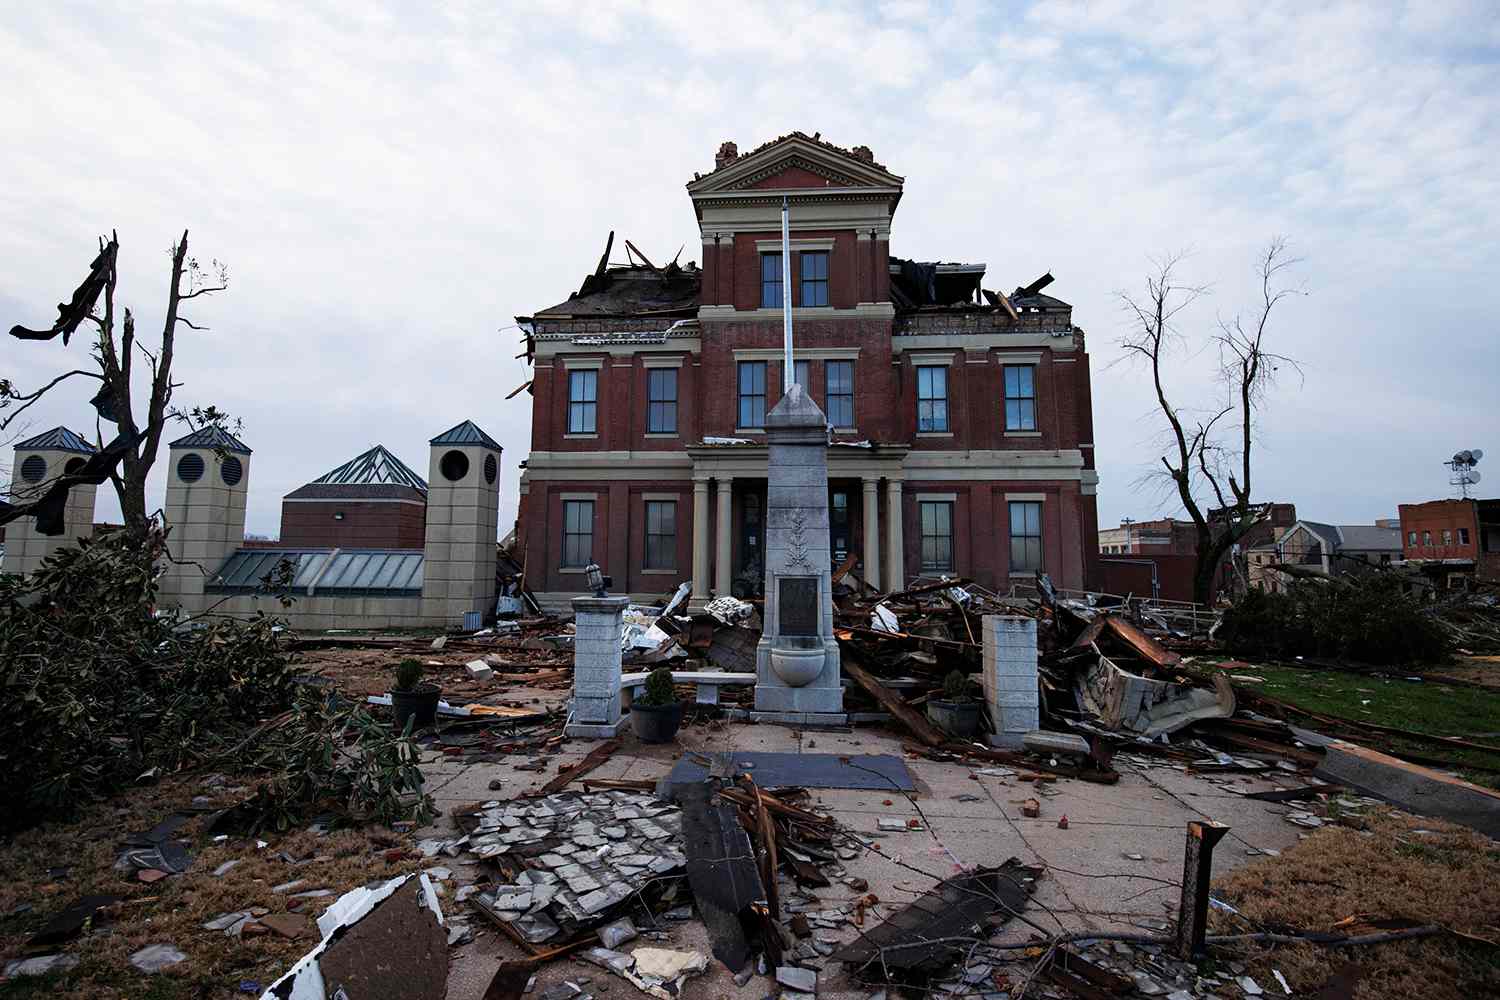 General view of the heavily tornado damaged courthouse on December 11, 2021 in Mayfield, Kentucky. Multiple tornadoes tore through parts of the lower Midwest late on Friday night leaving a large path of destruction and unknown fatalities.